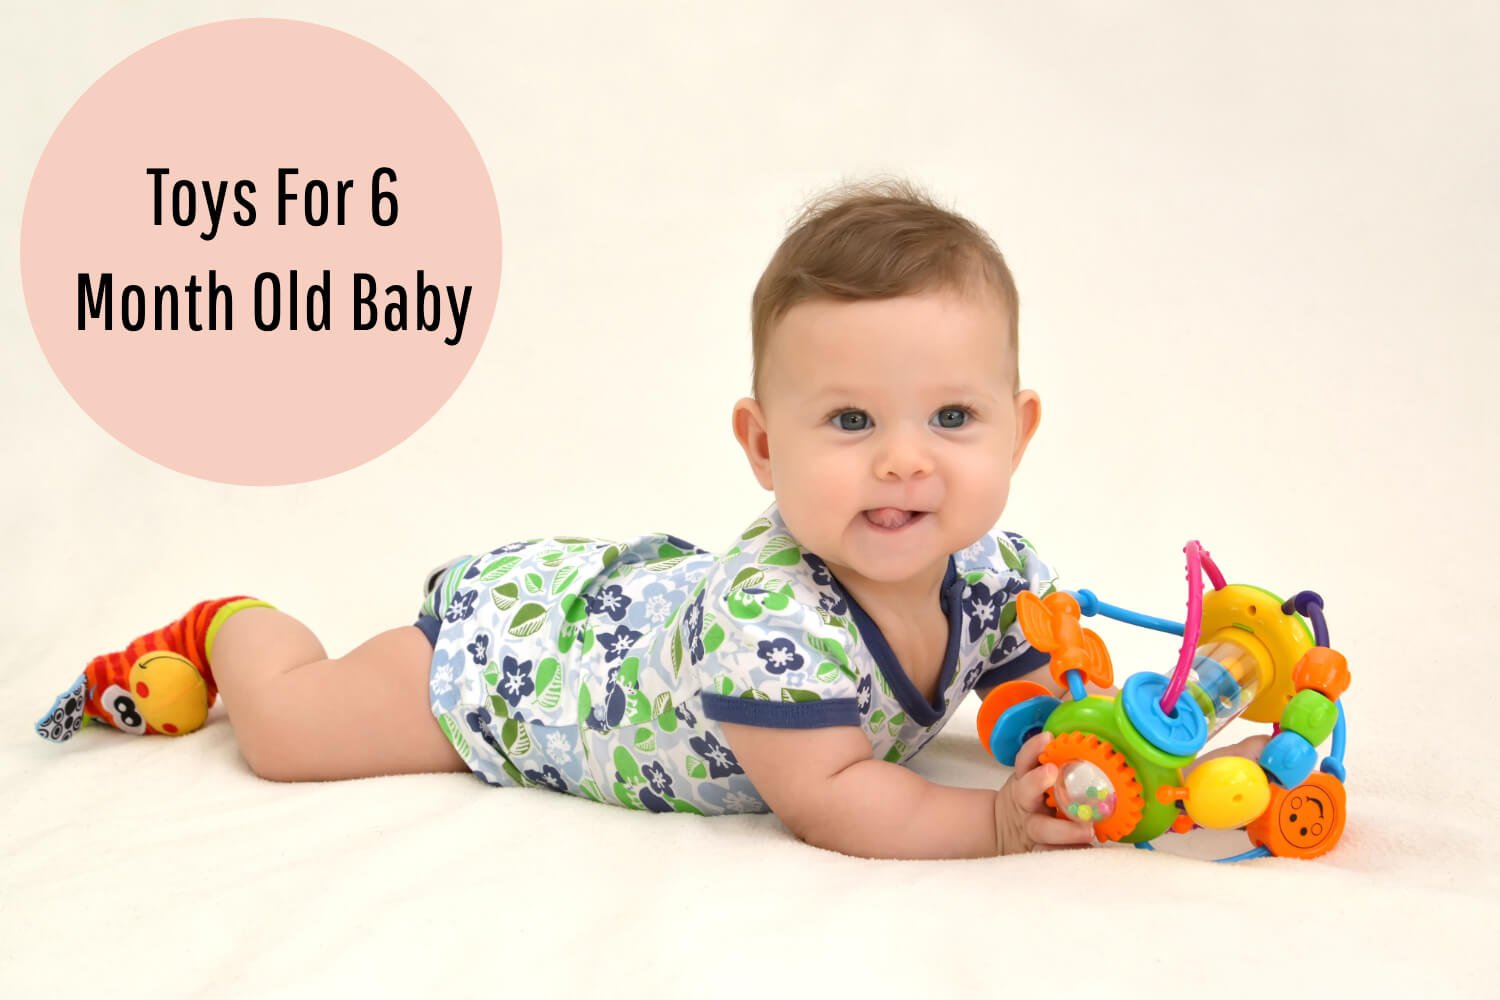 Toys For 6 Month Old Baby – Types, Benefits and What to Buy